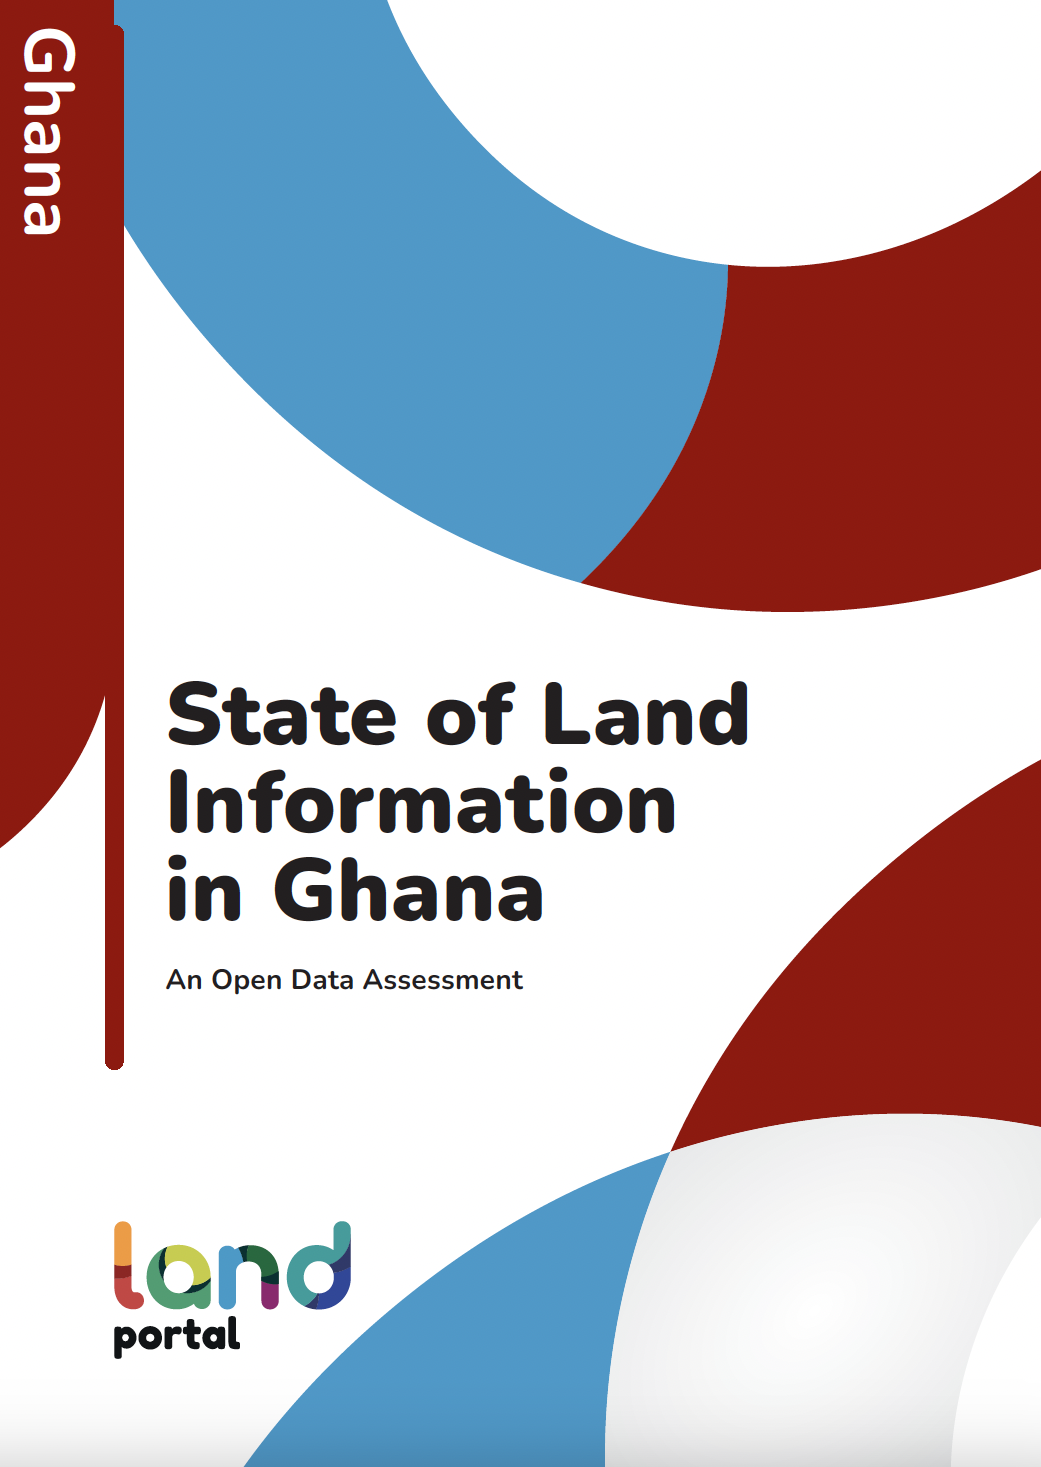 State of Land Information in Ghana